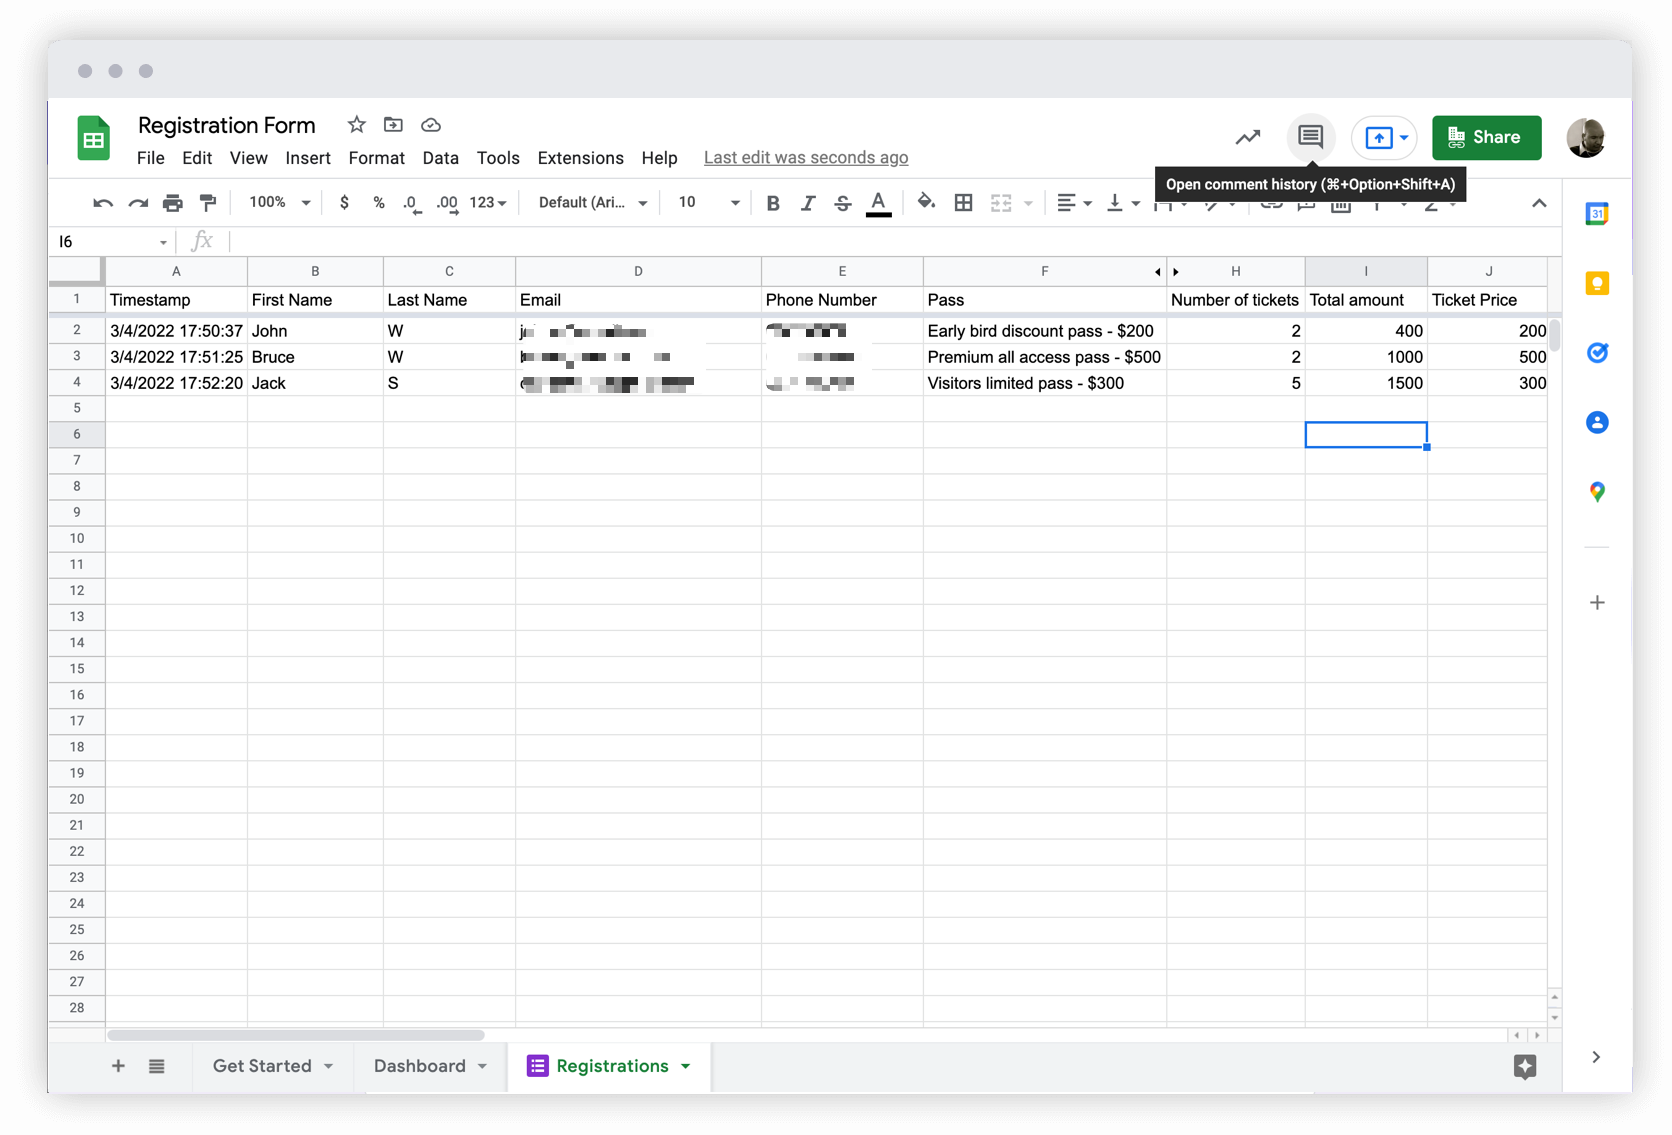 Sync responses to Google Sheets to analyze the data or integrate with other apps using Zapier or Apps script